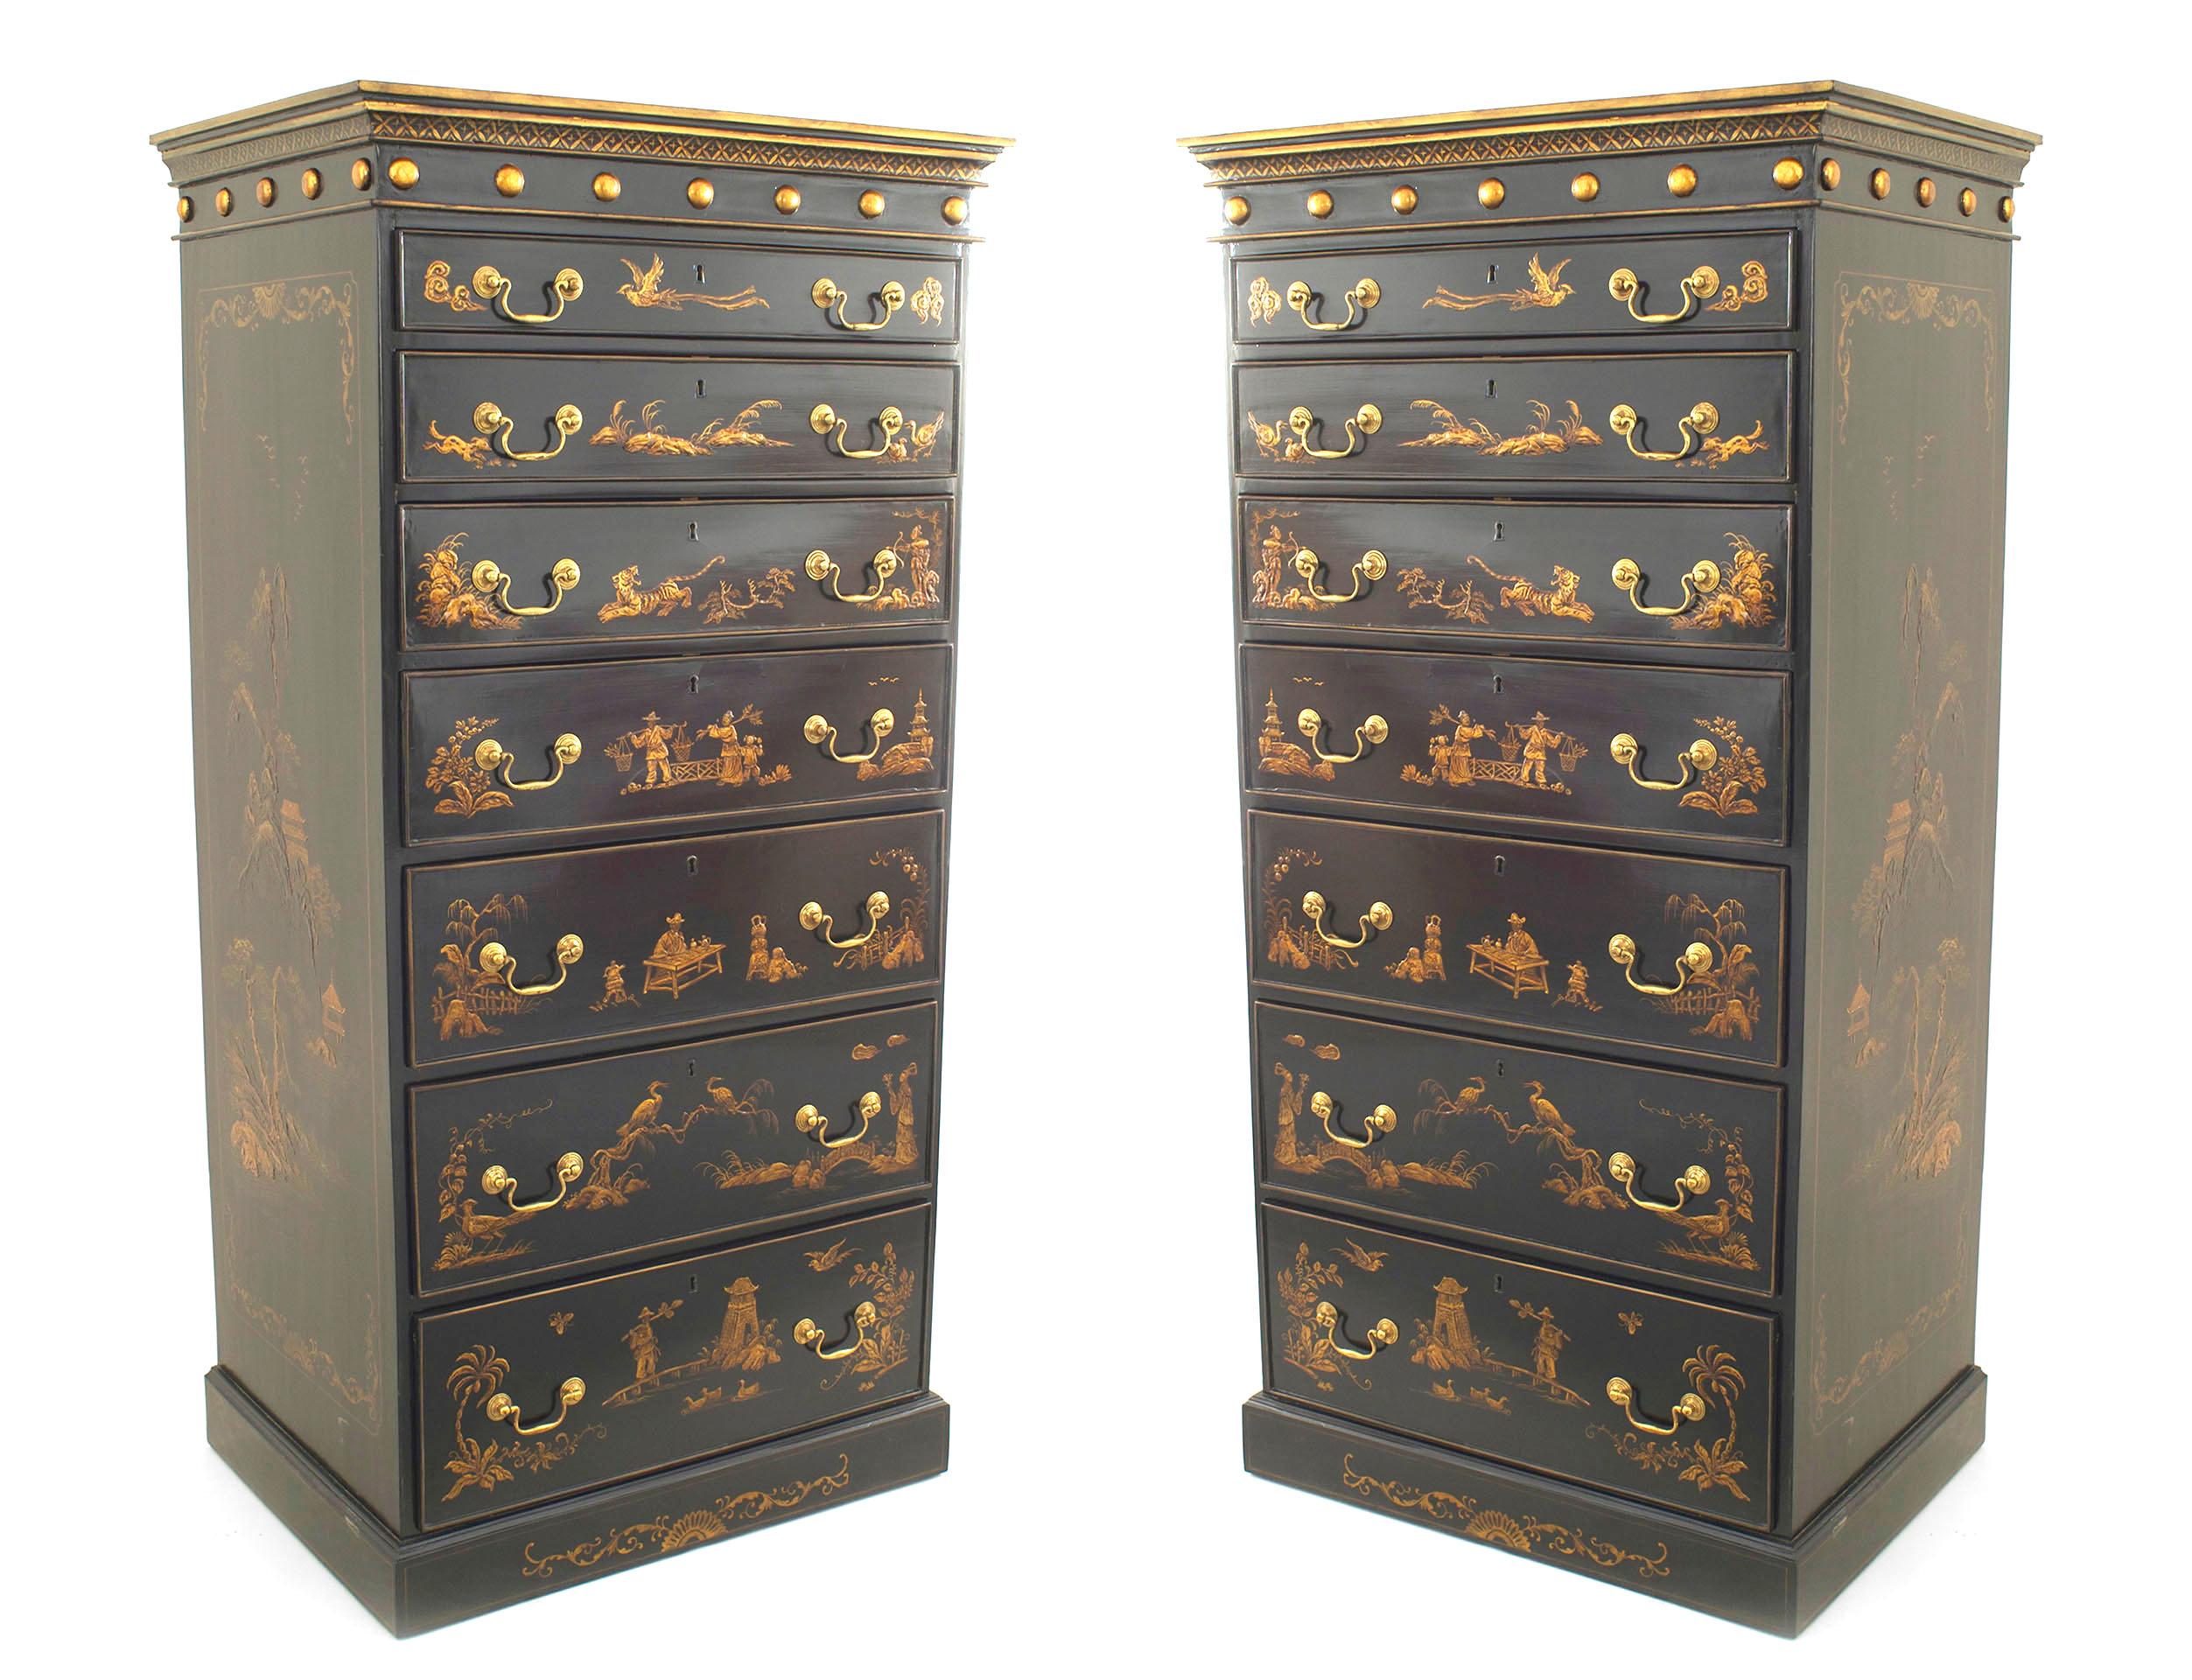 Two English Regency style black lacquered chests of seven drawers (semainier)
with chinoiserie decoration. 

PRICED EACH.